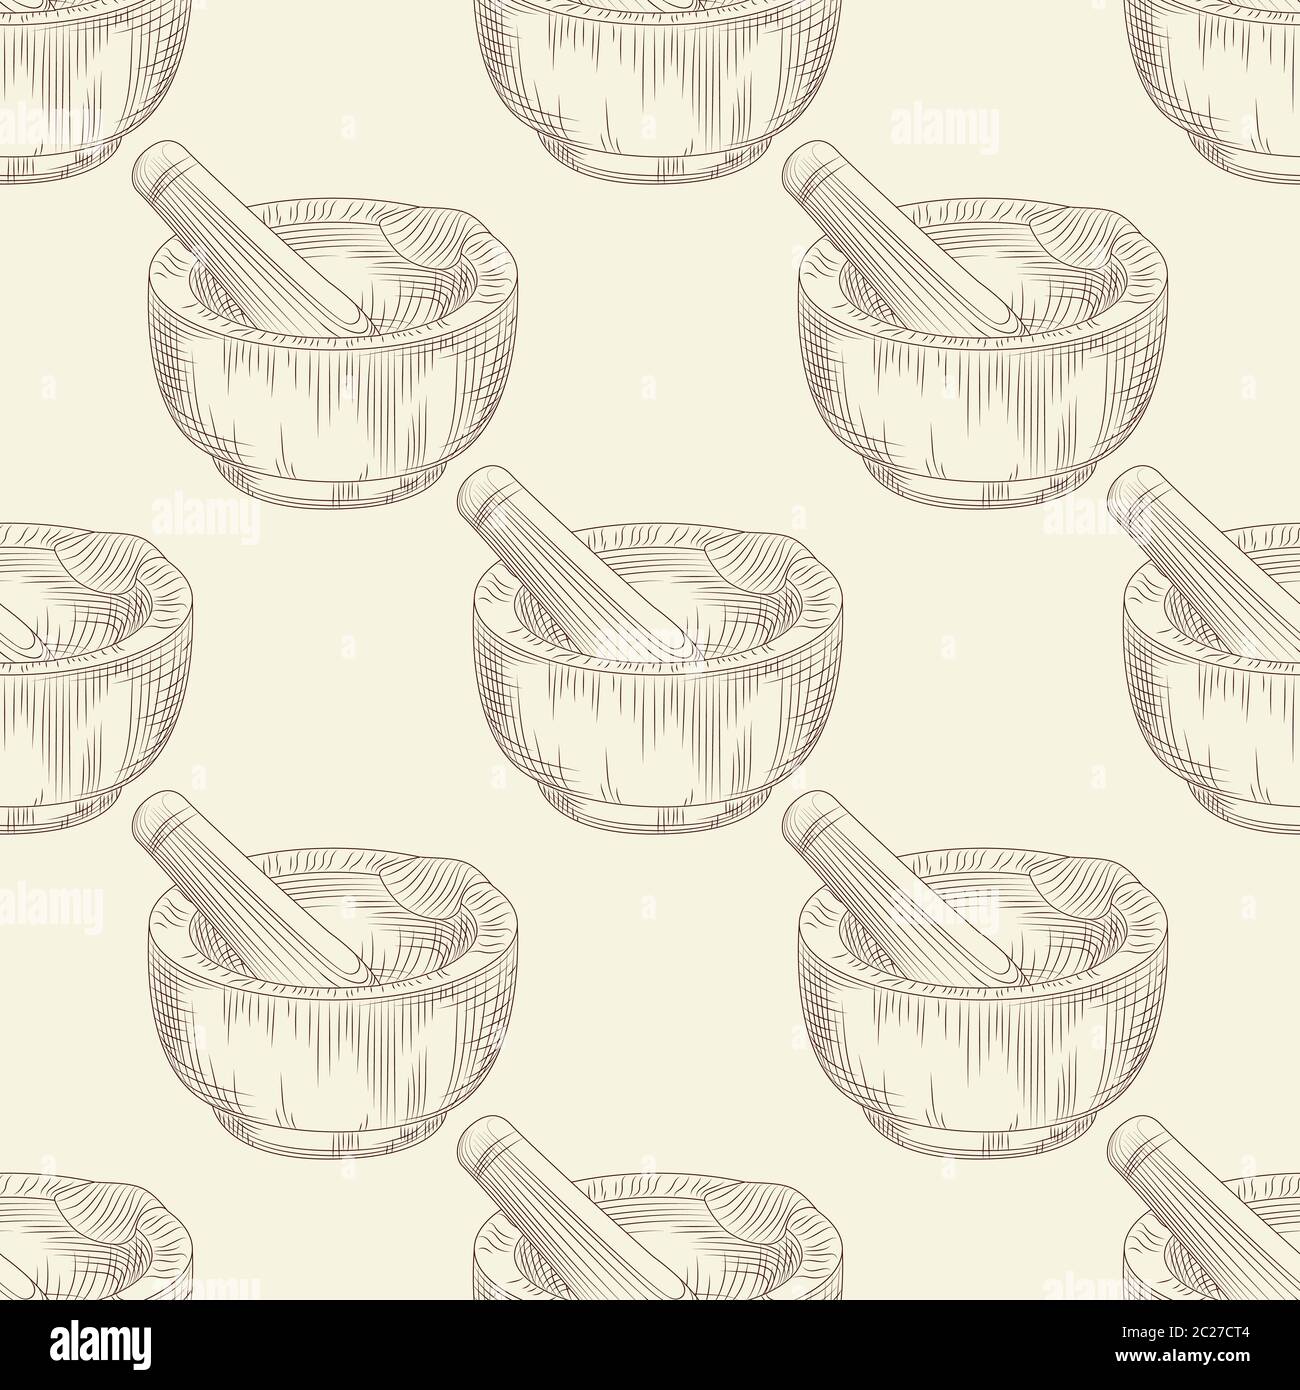 Mortar and pestle seamless pattern. Grinding spices and solid food ingredients wallpaper. Engraving vintage style. Vector illustration. Stock Vector